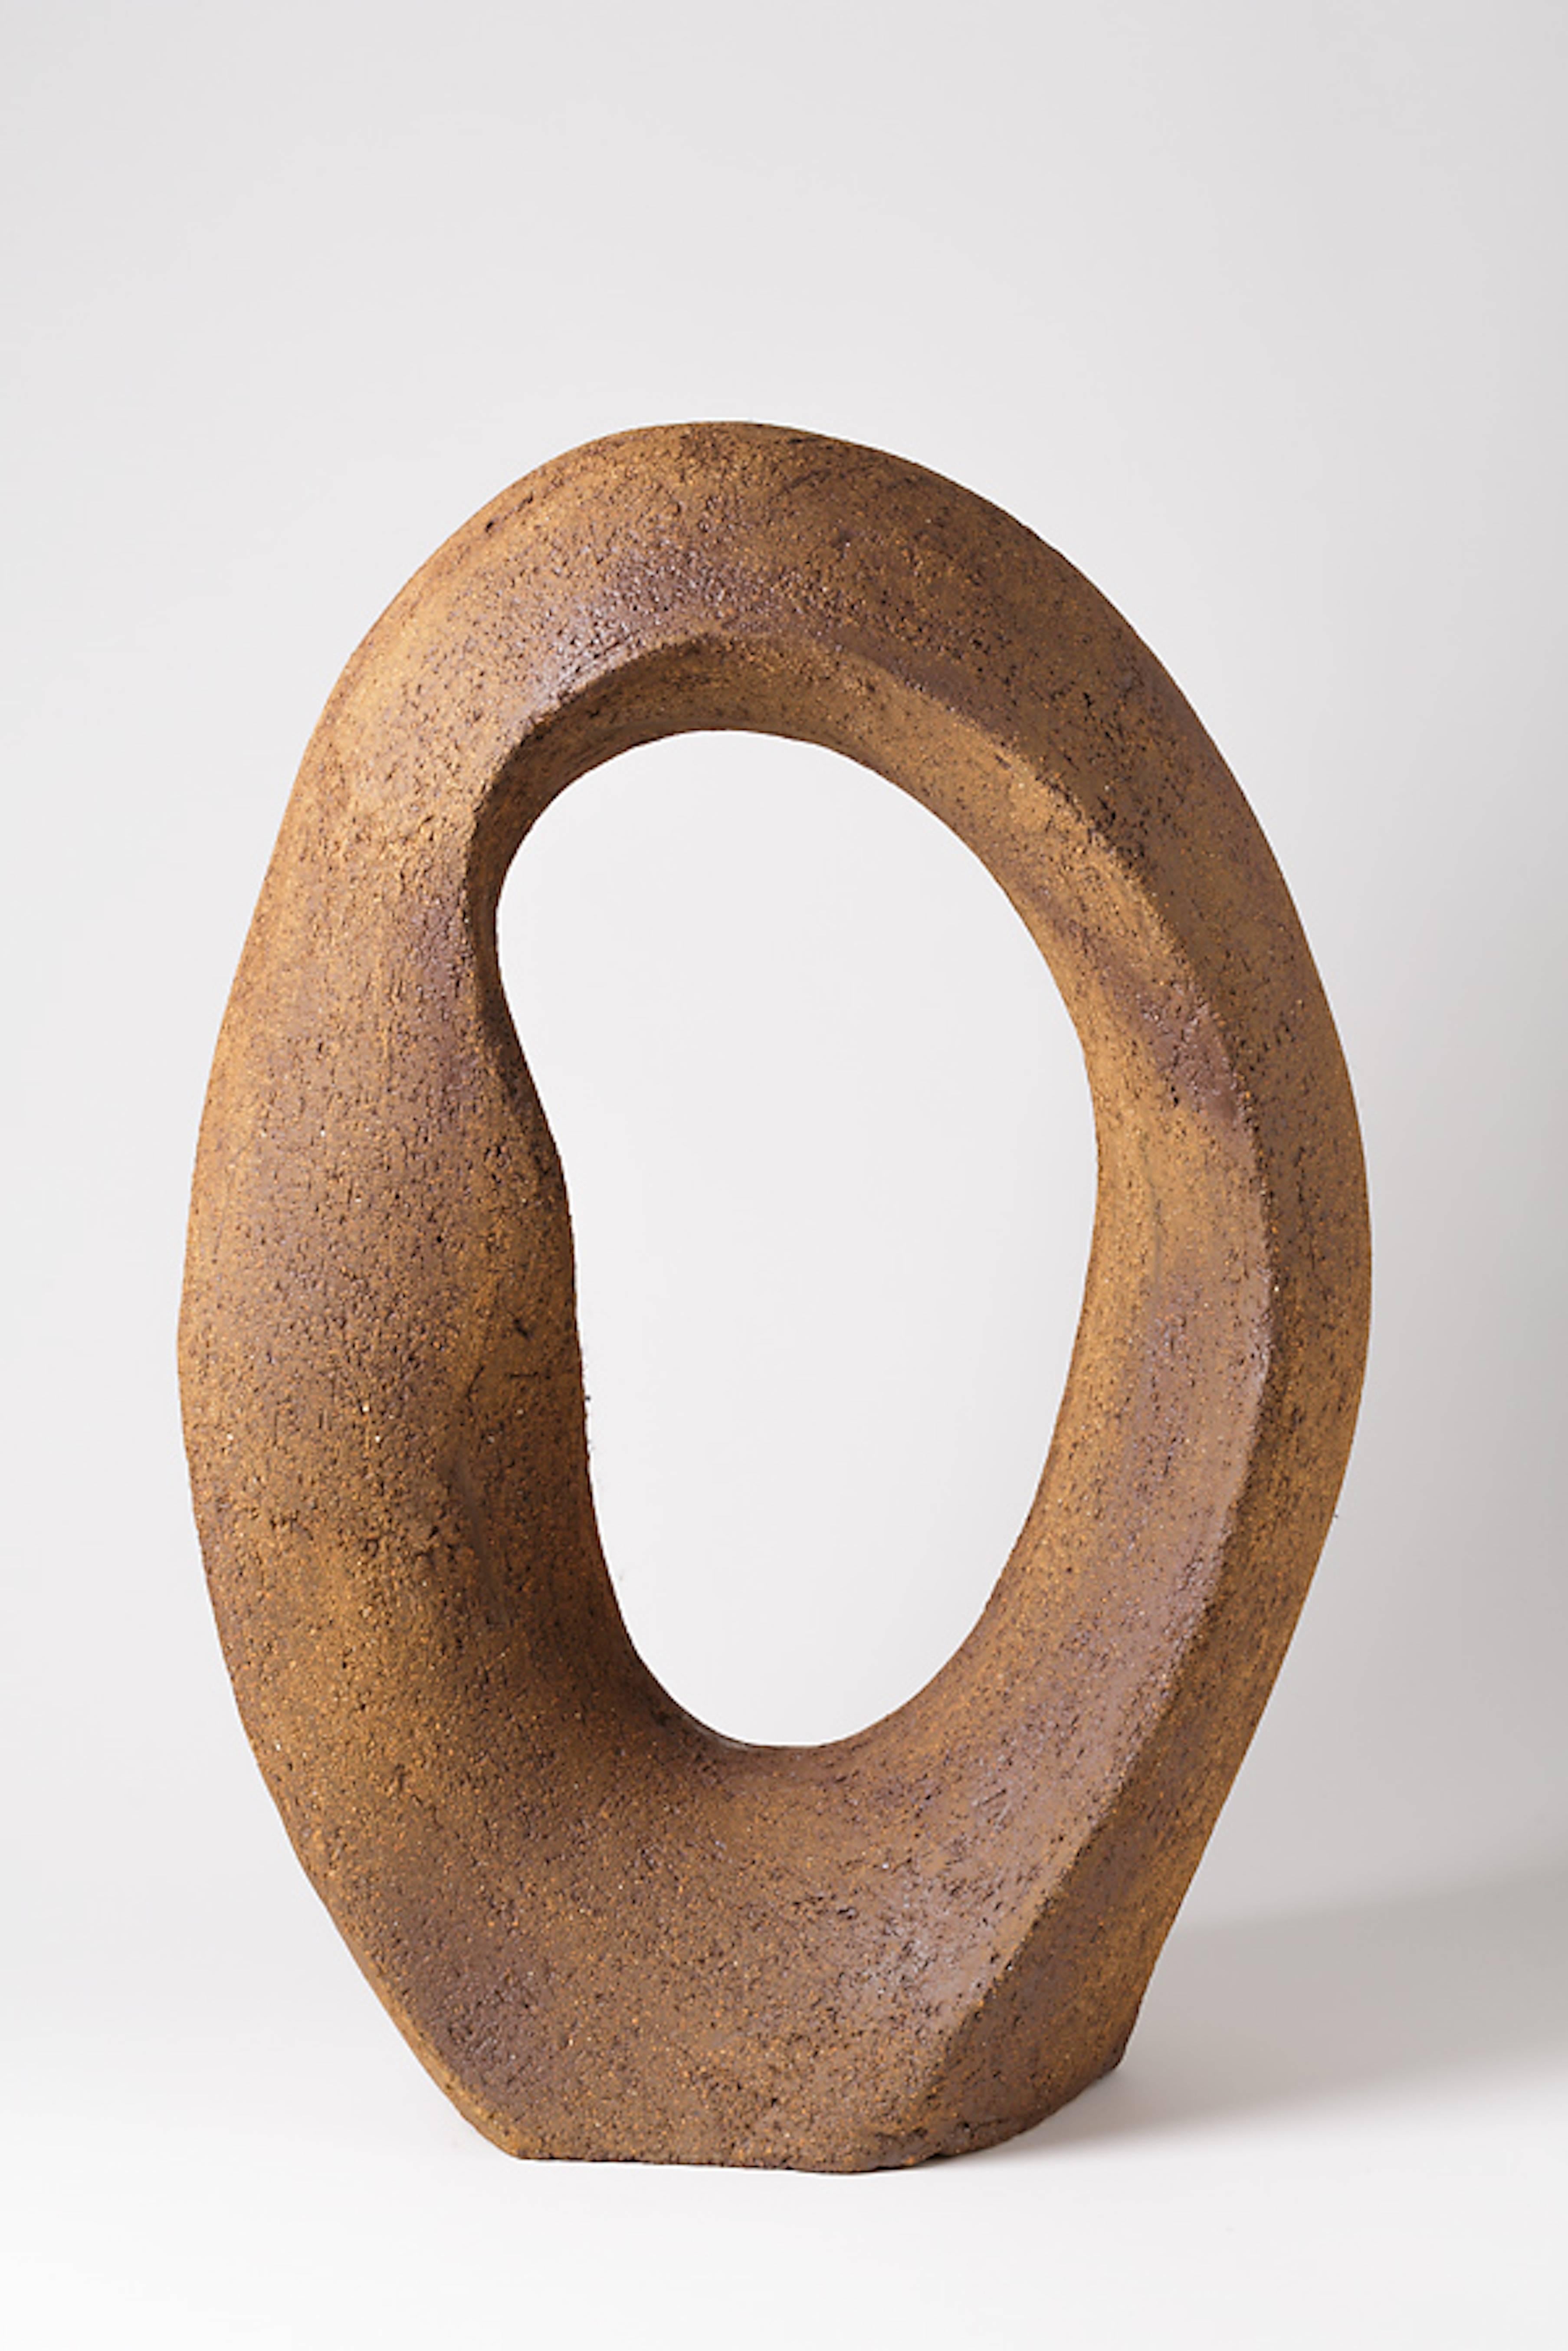 An important stoneware sculpture by Tim Orr.
Handwritten signature at the base 